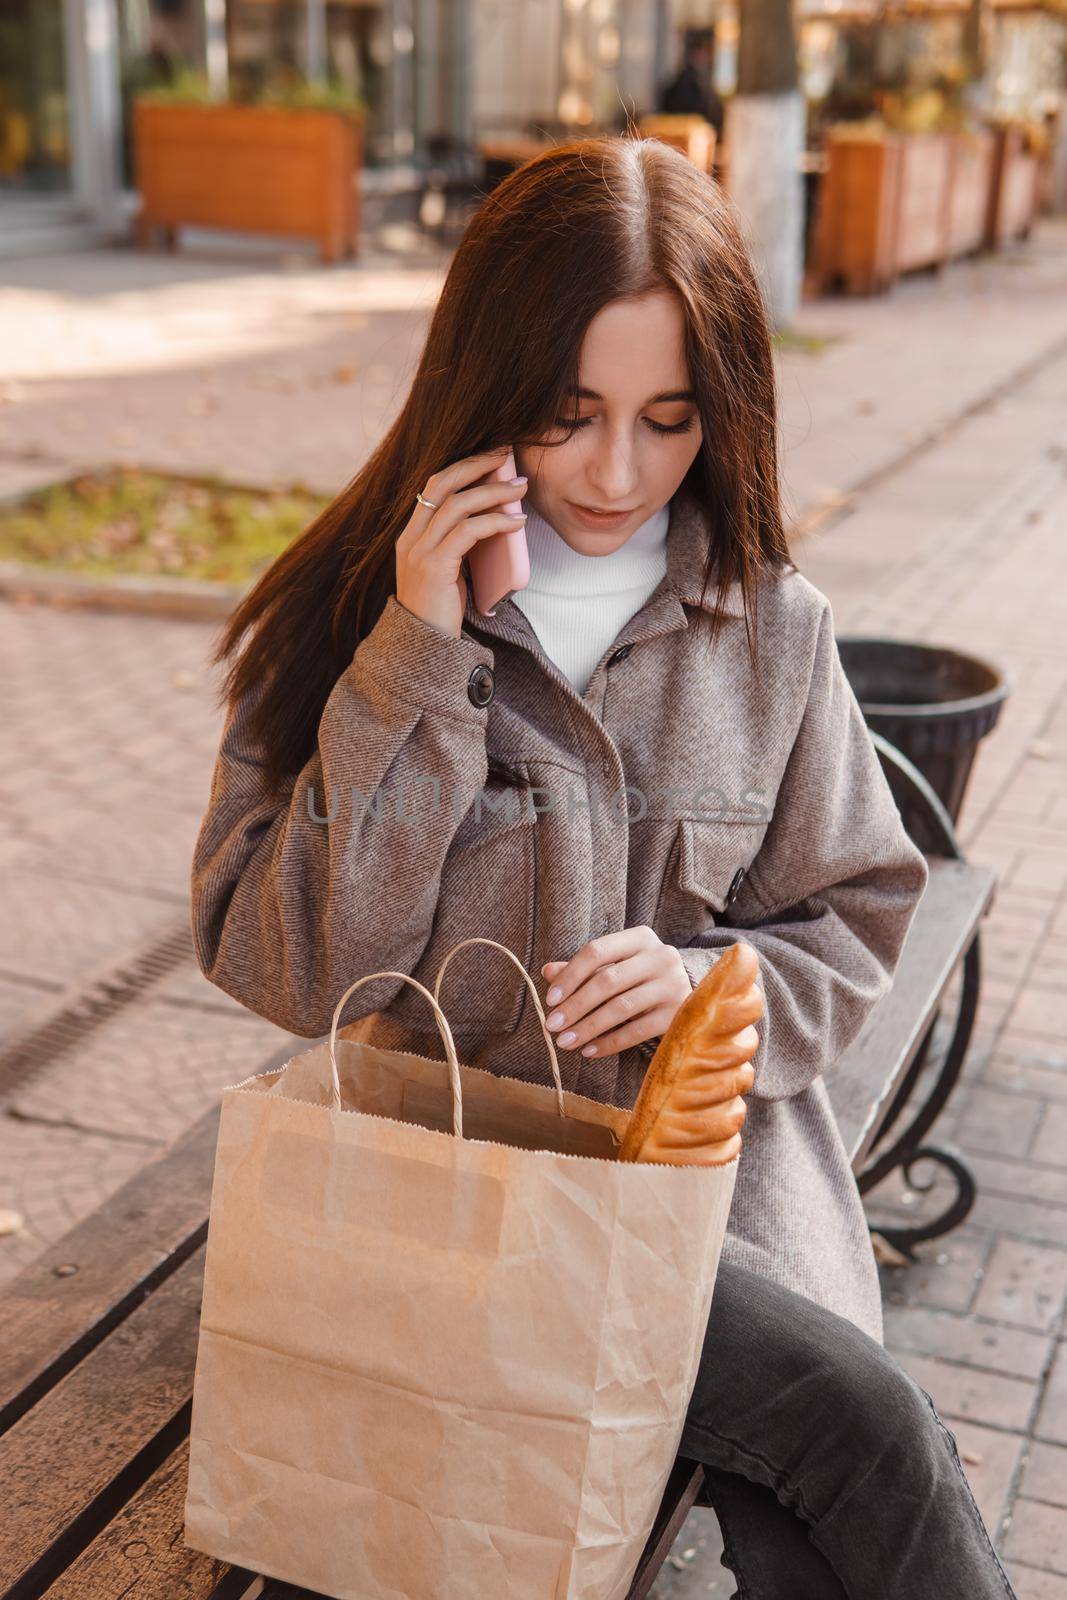 A stylish brunette woman walks around the autumn city. The brunette is sitting on a bench outside with a glass of coffee and a phone, holding a craft bag with a baguette.